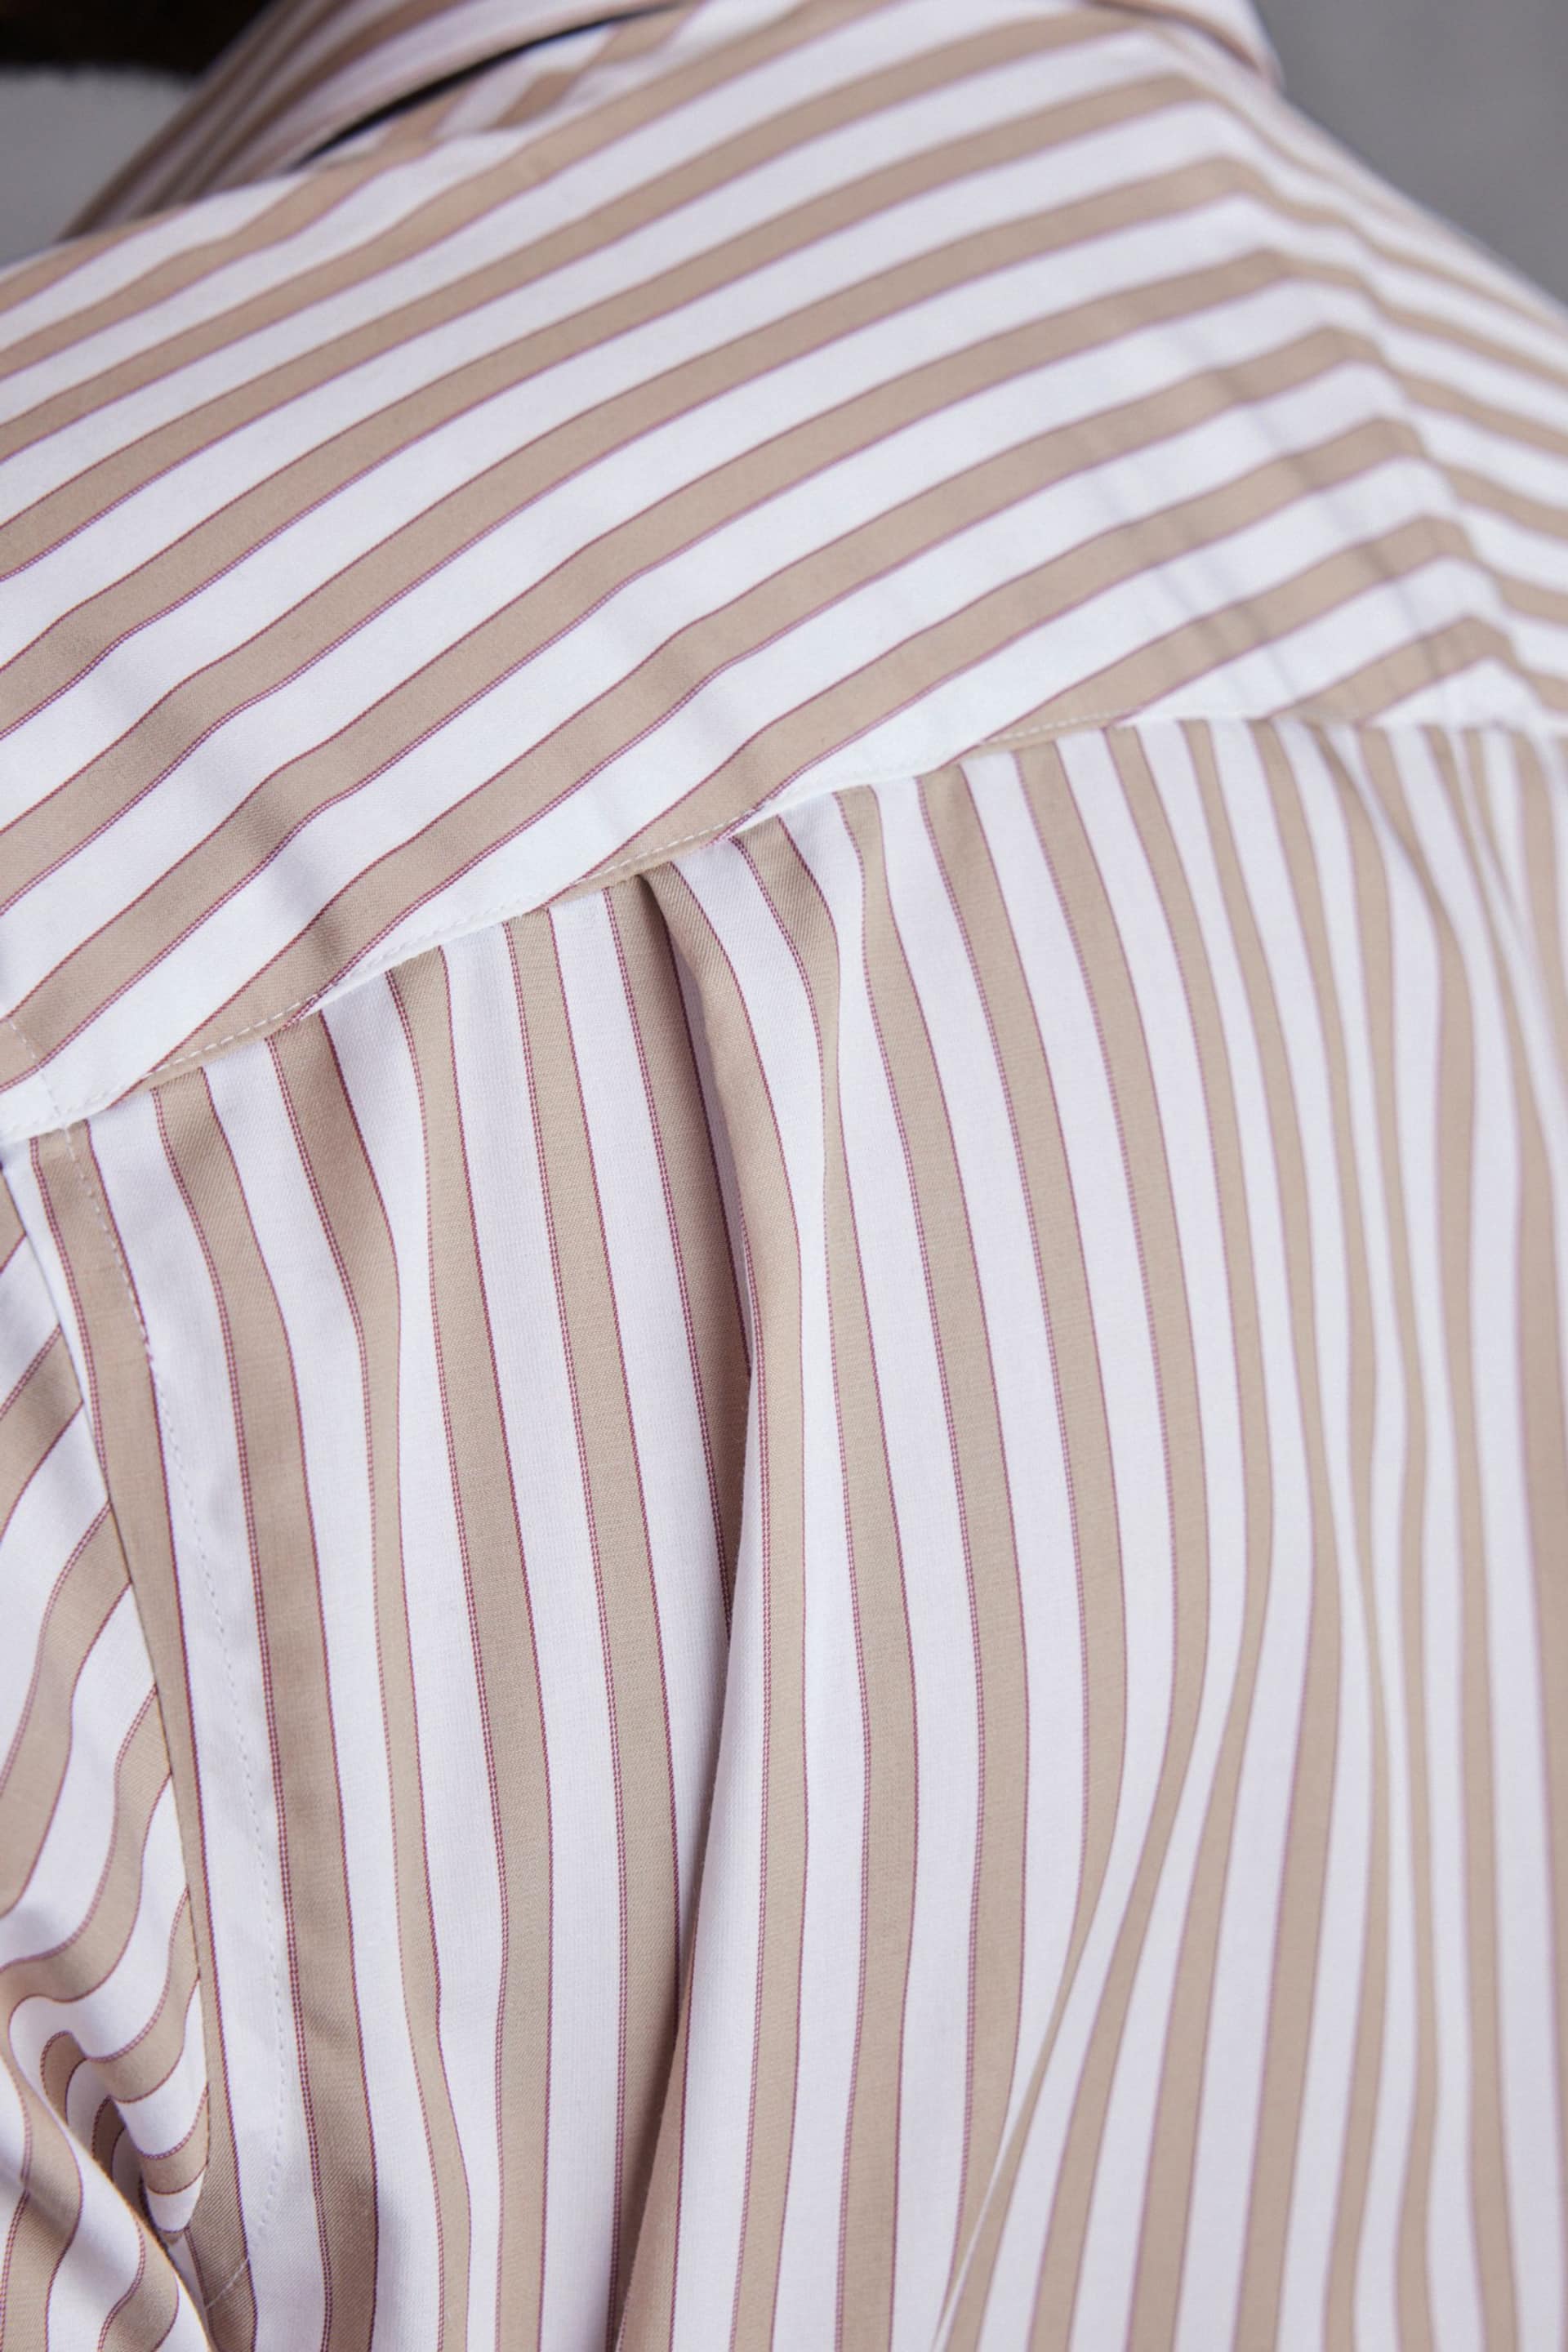 Neutral Brown/White Stripe Signature Trimmed Shirt - Image 5 of 9